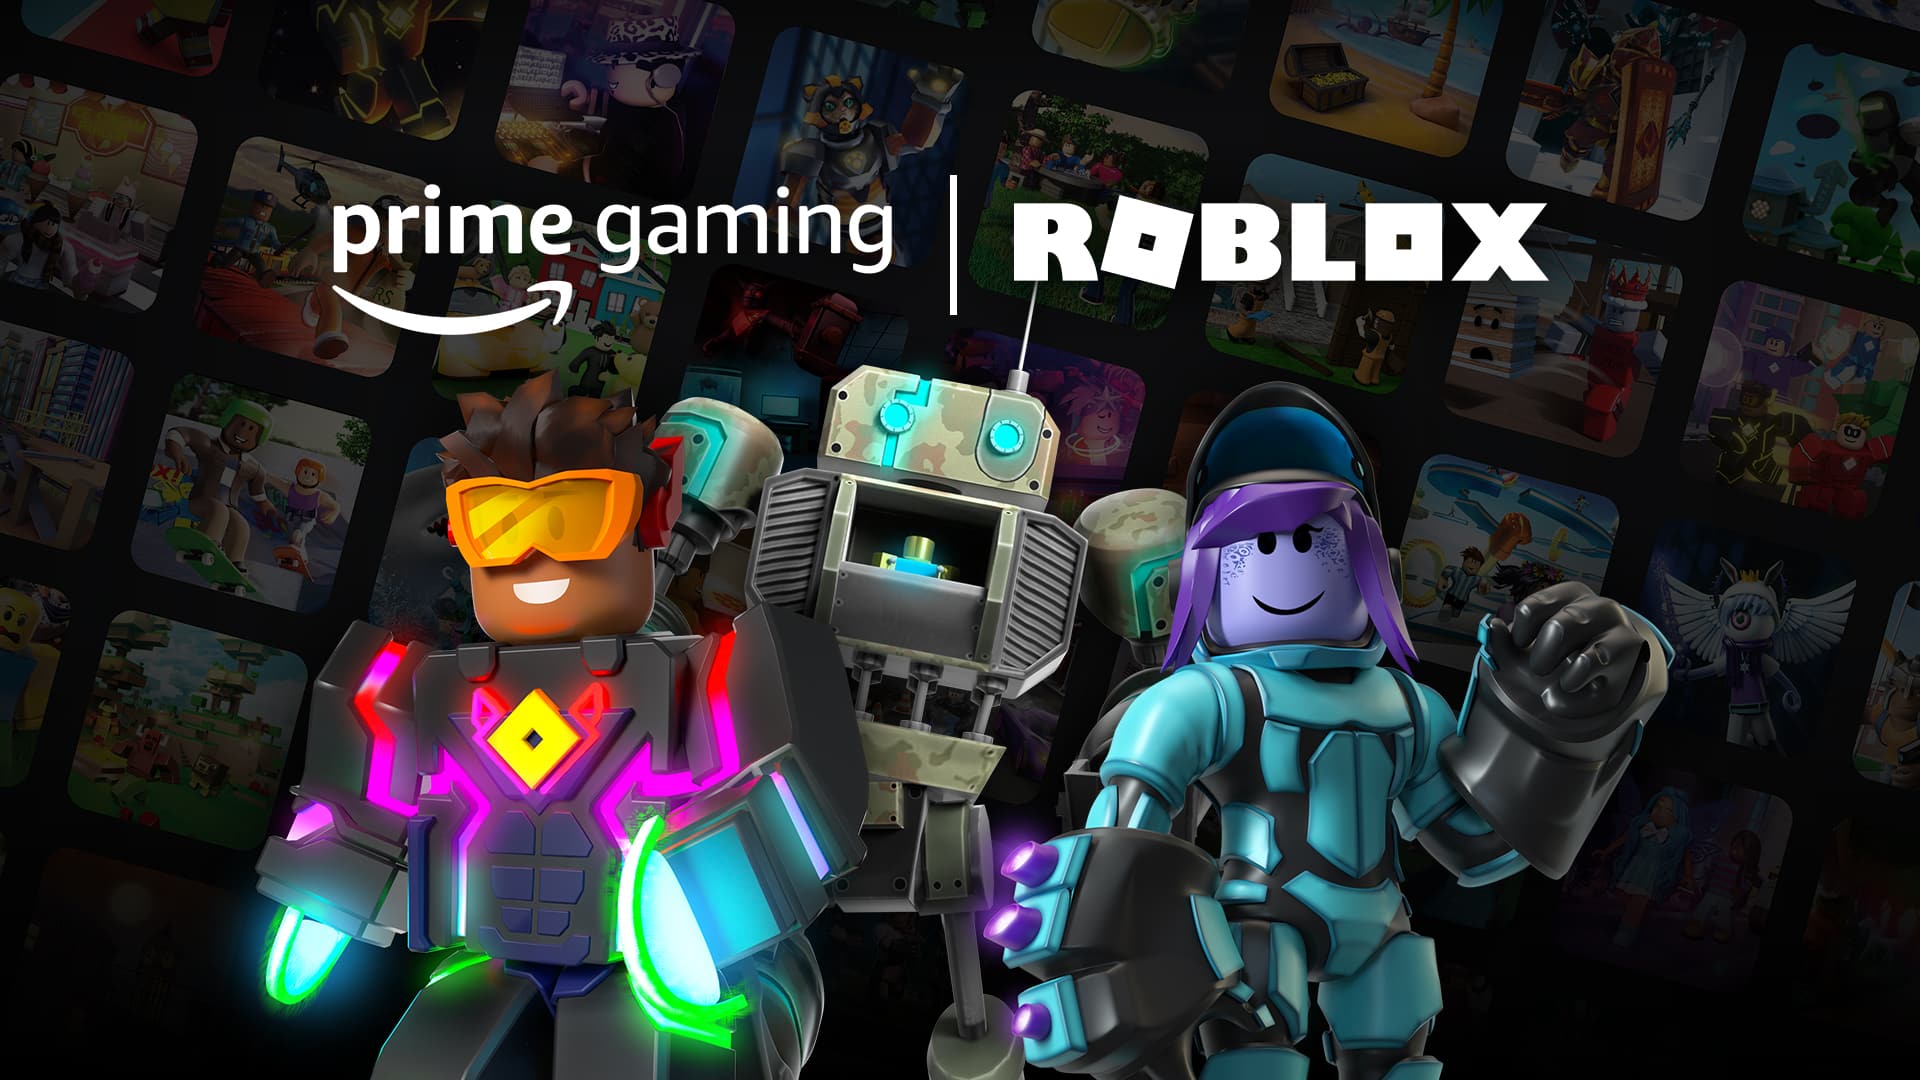 How to claim Roblox Prime Gaming rewards: Delinquent Demon